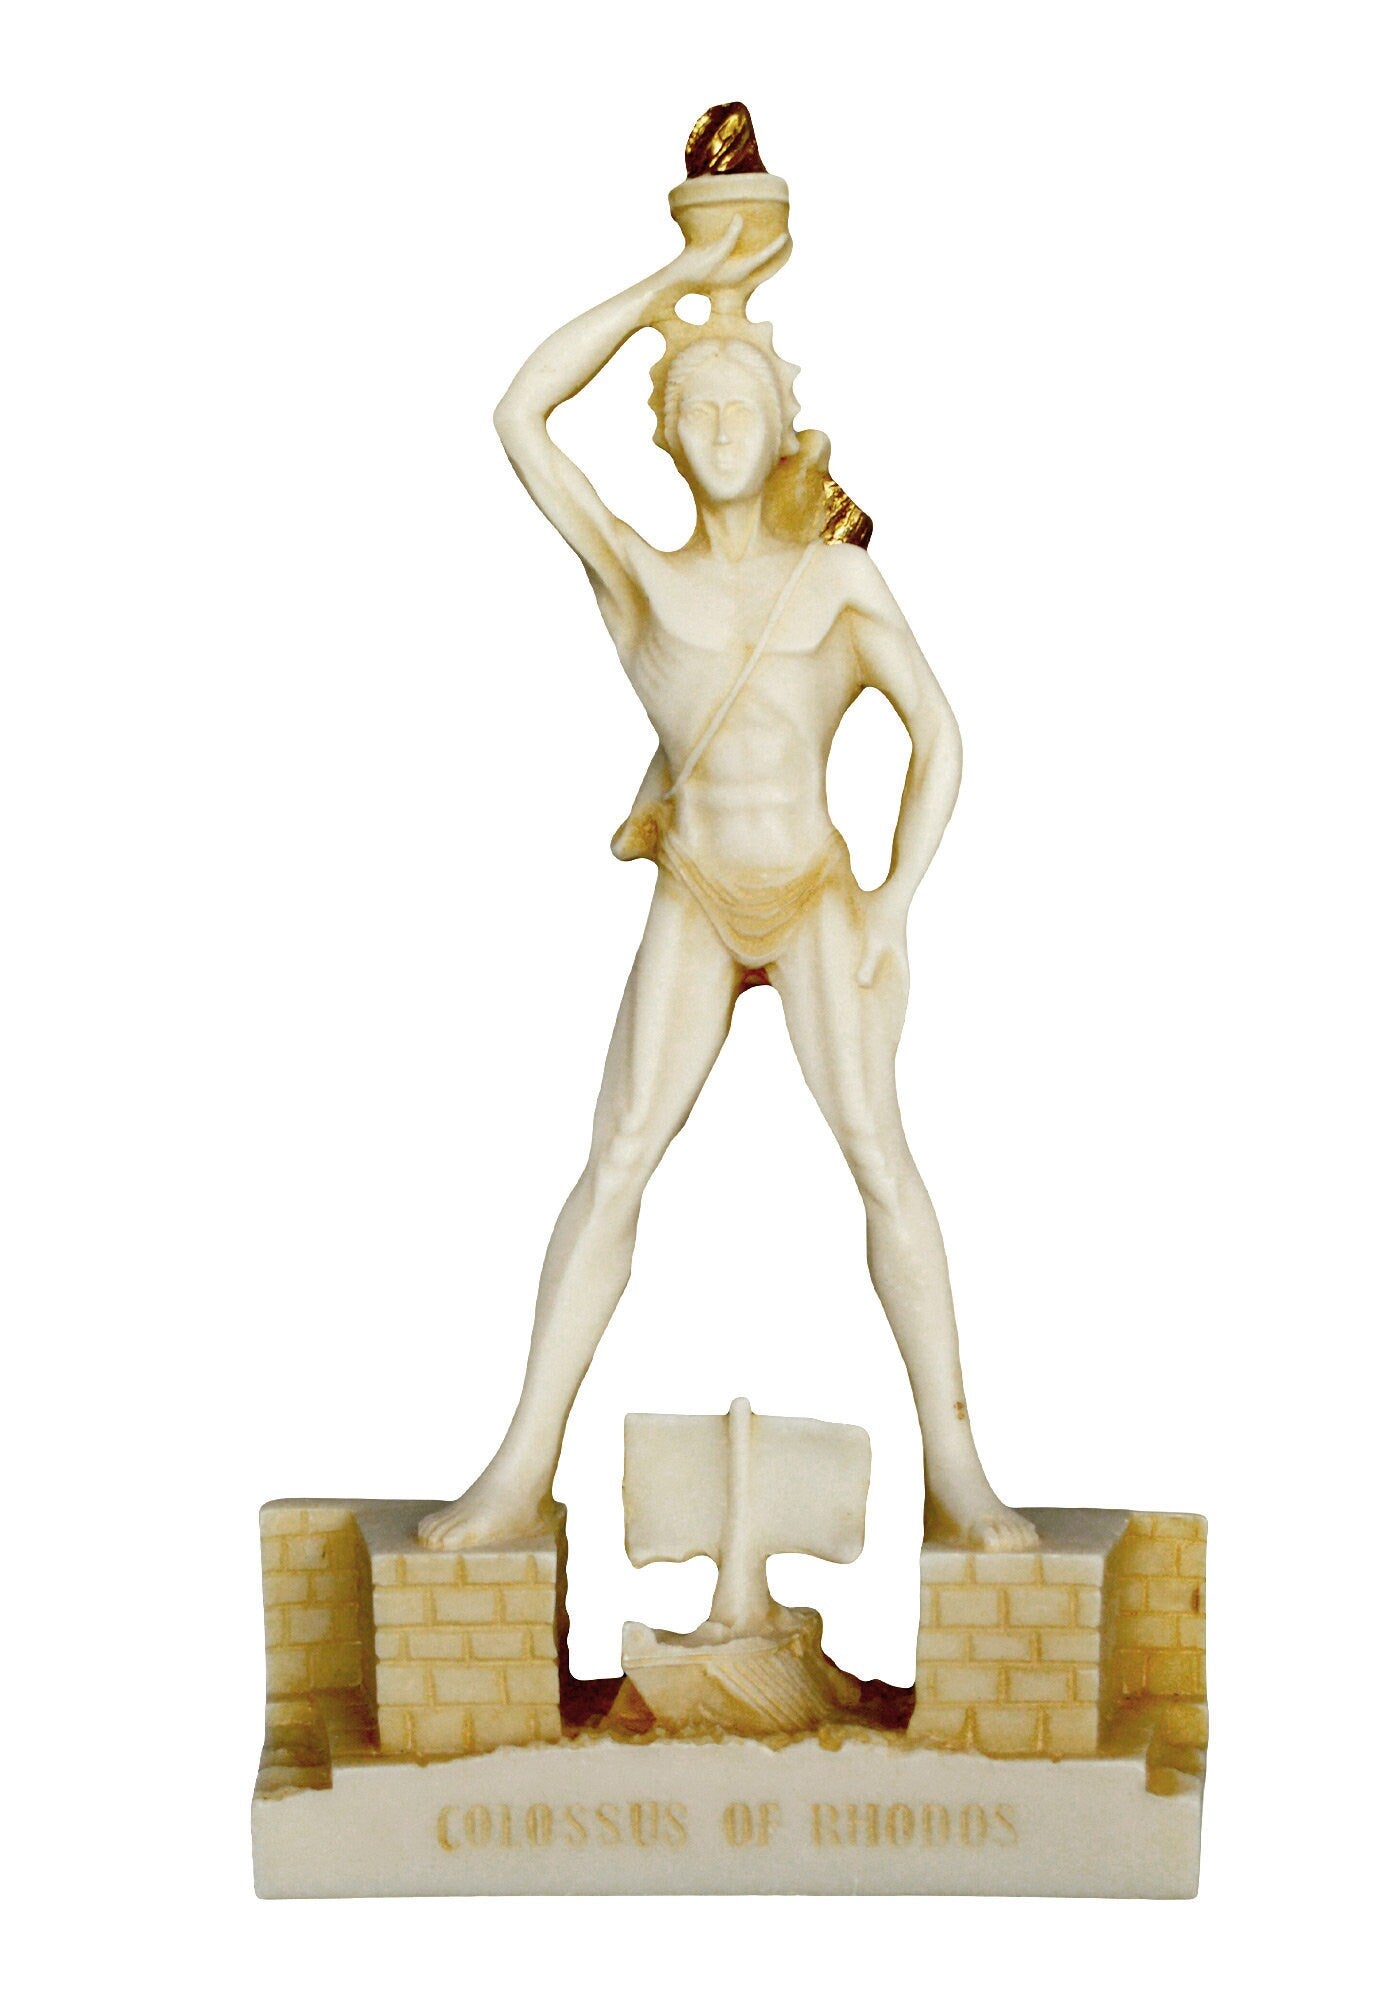 Colossus of Rhodes - Sun God Helios - 280-226 BC - One of the Seven Wonders of the Ancient World - Aged Alabaster Statue